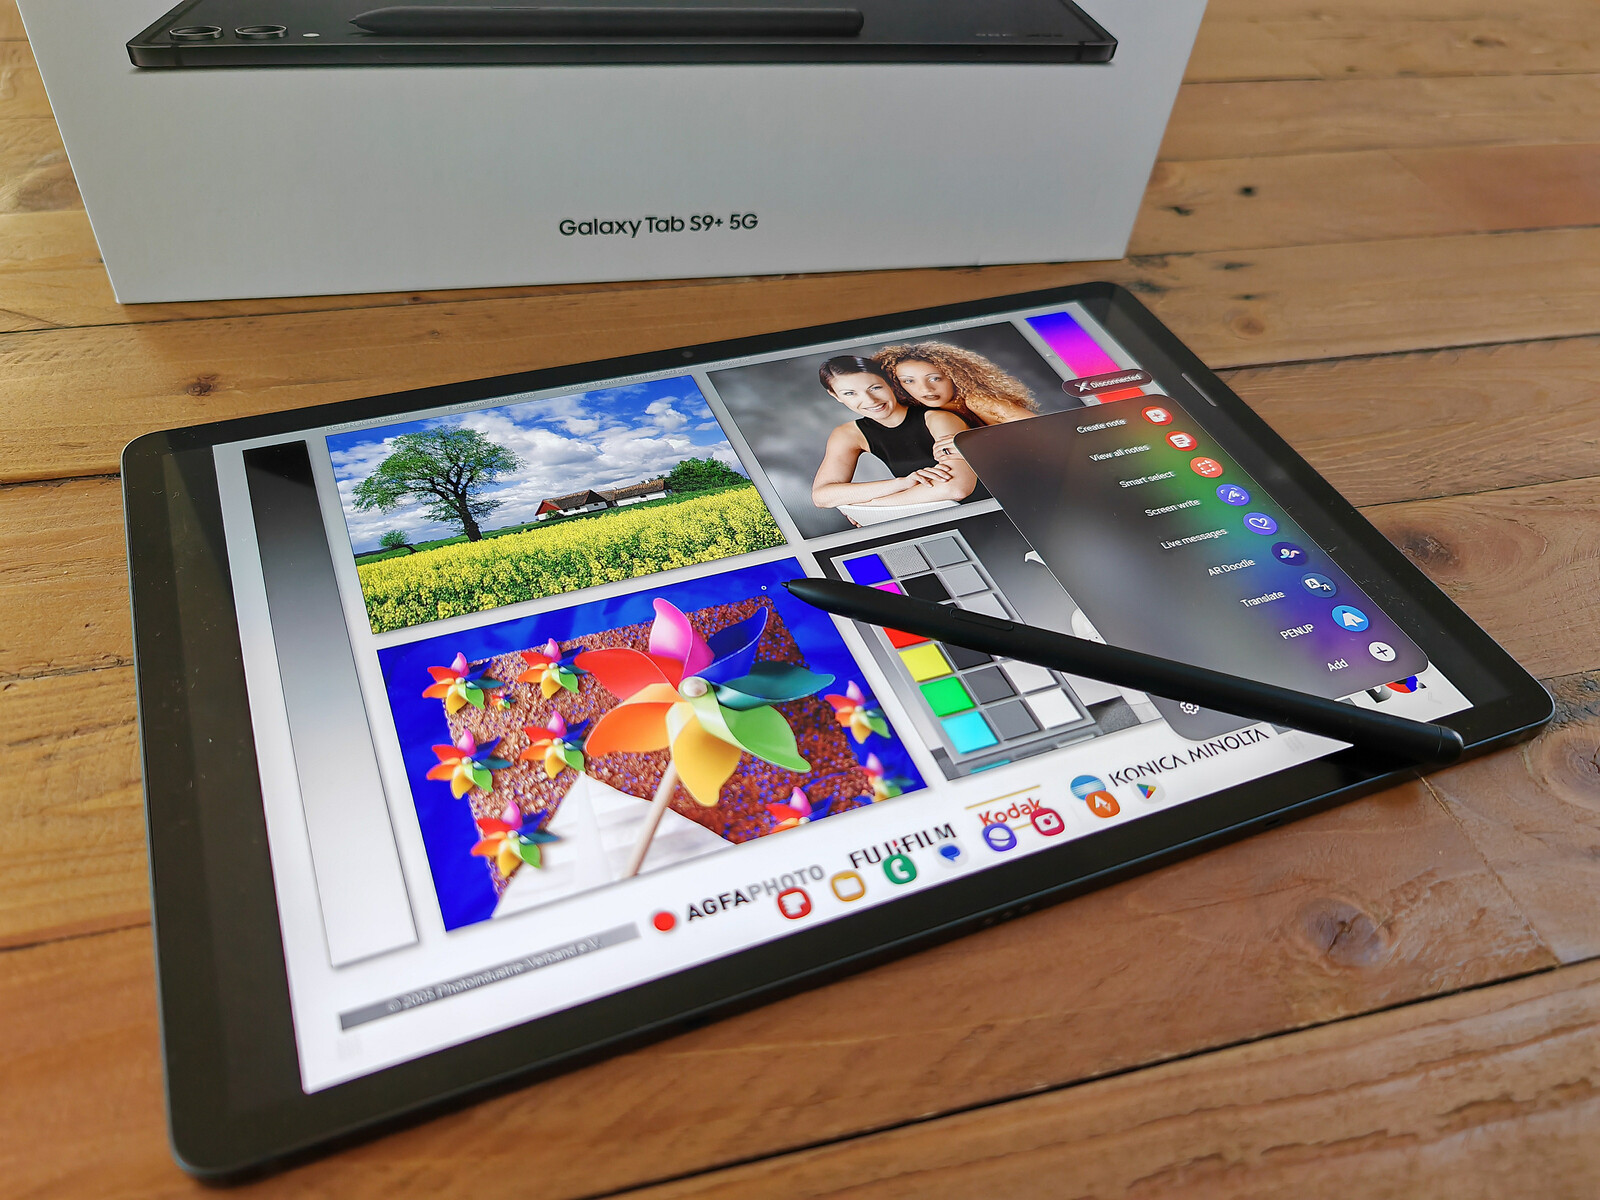 Samsung Galaxy Tab S9 Ultra Reviews, Pros and Cons